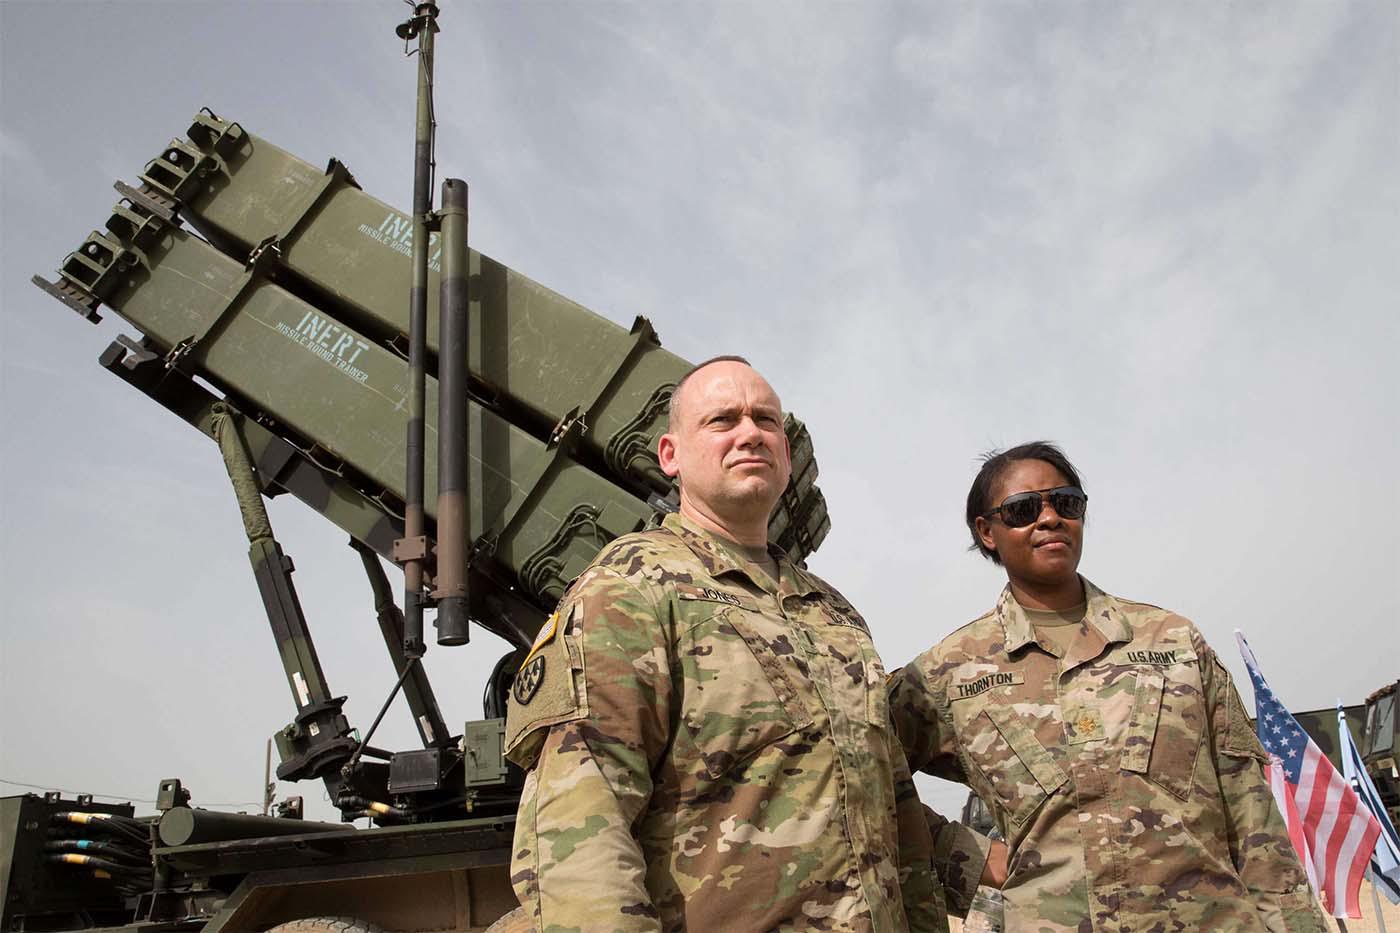 The US will send Patriot missiles to Saudi Arabia to help the country's defense